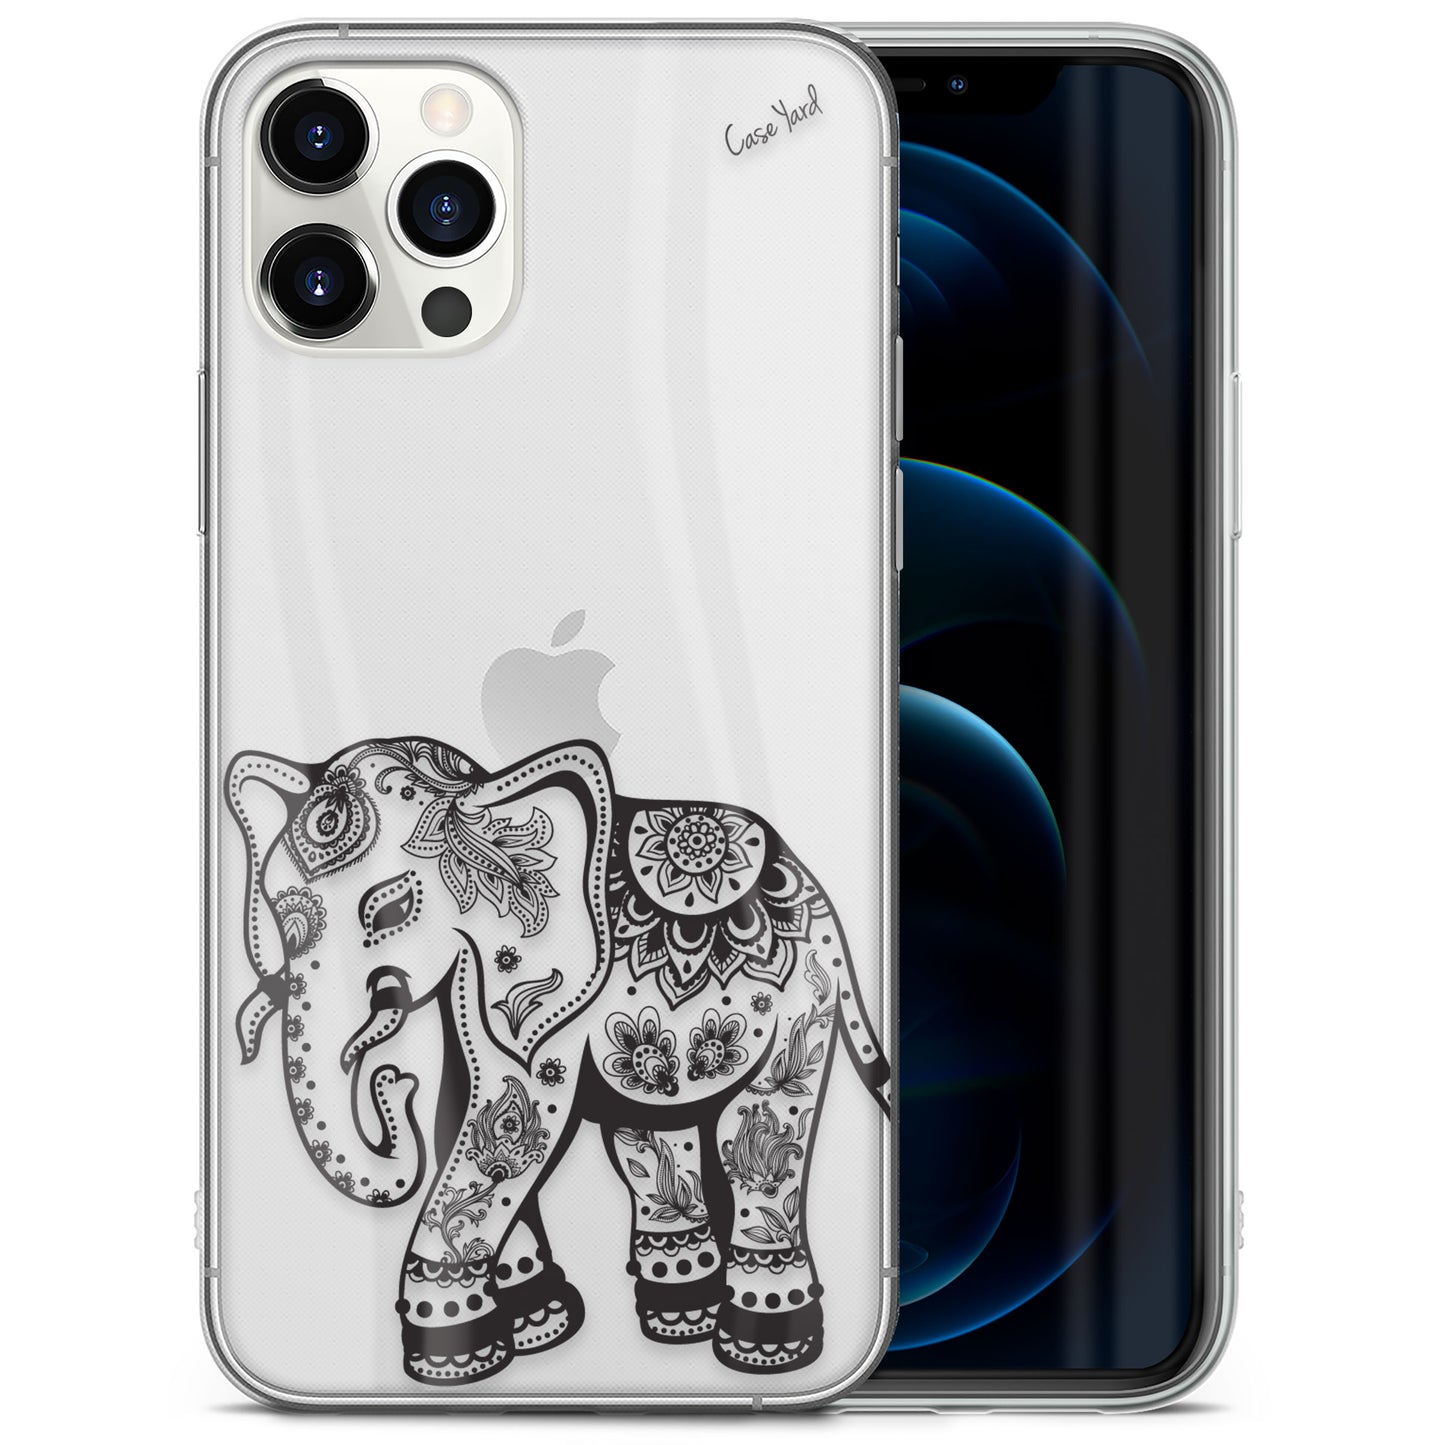 TPU Clear case with (Elephant 2) Design for iPhone & Samsung Phones